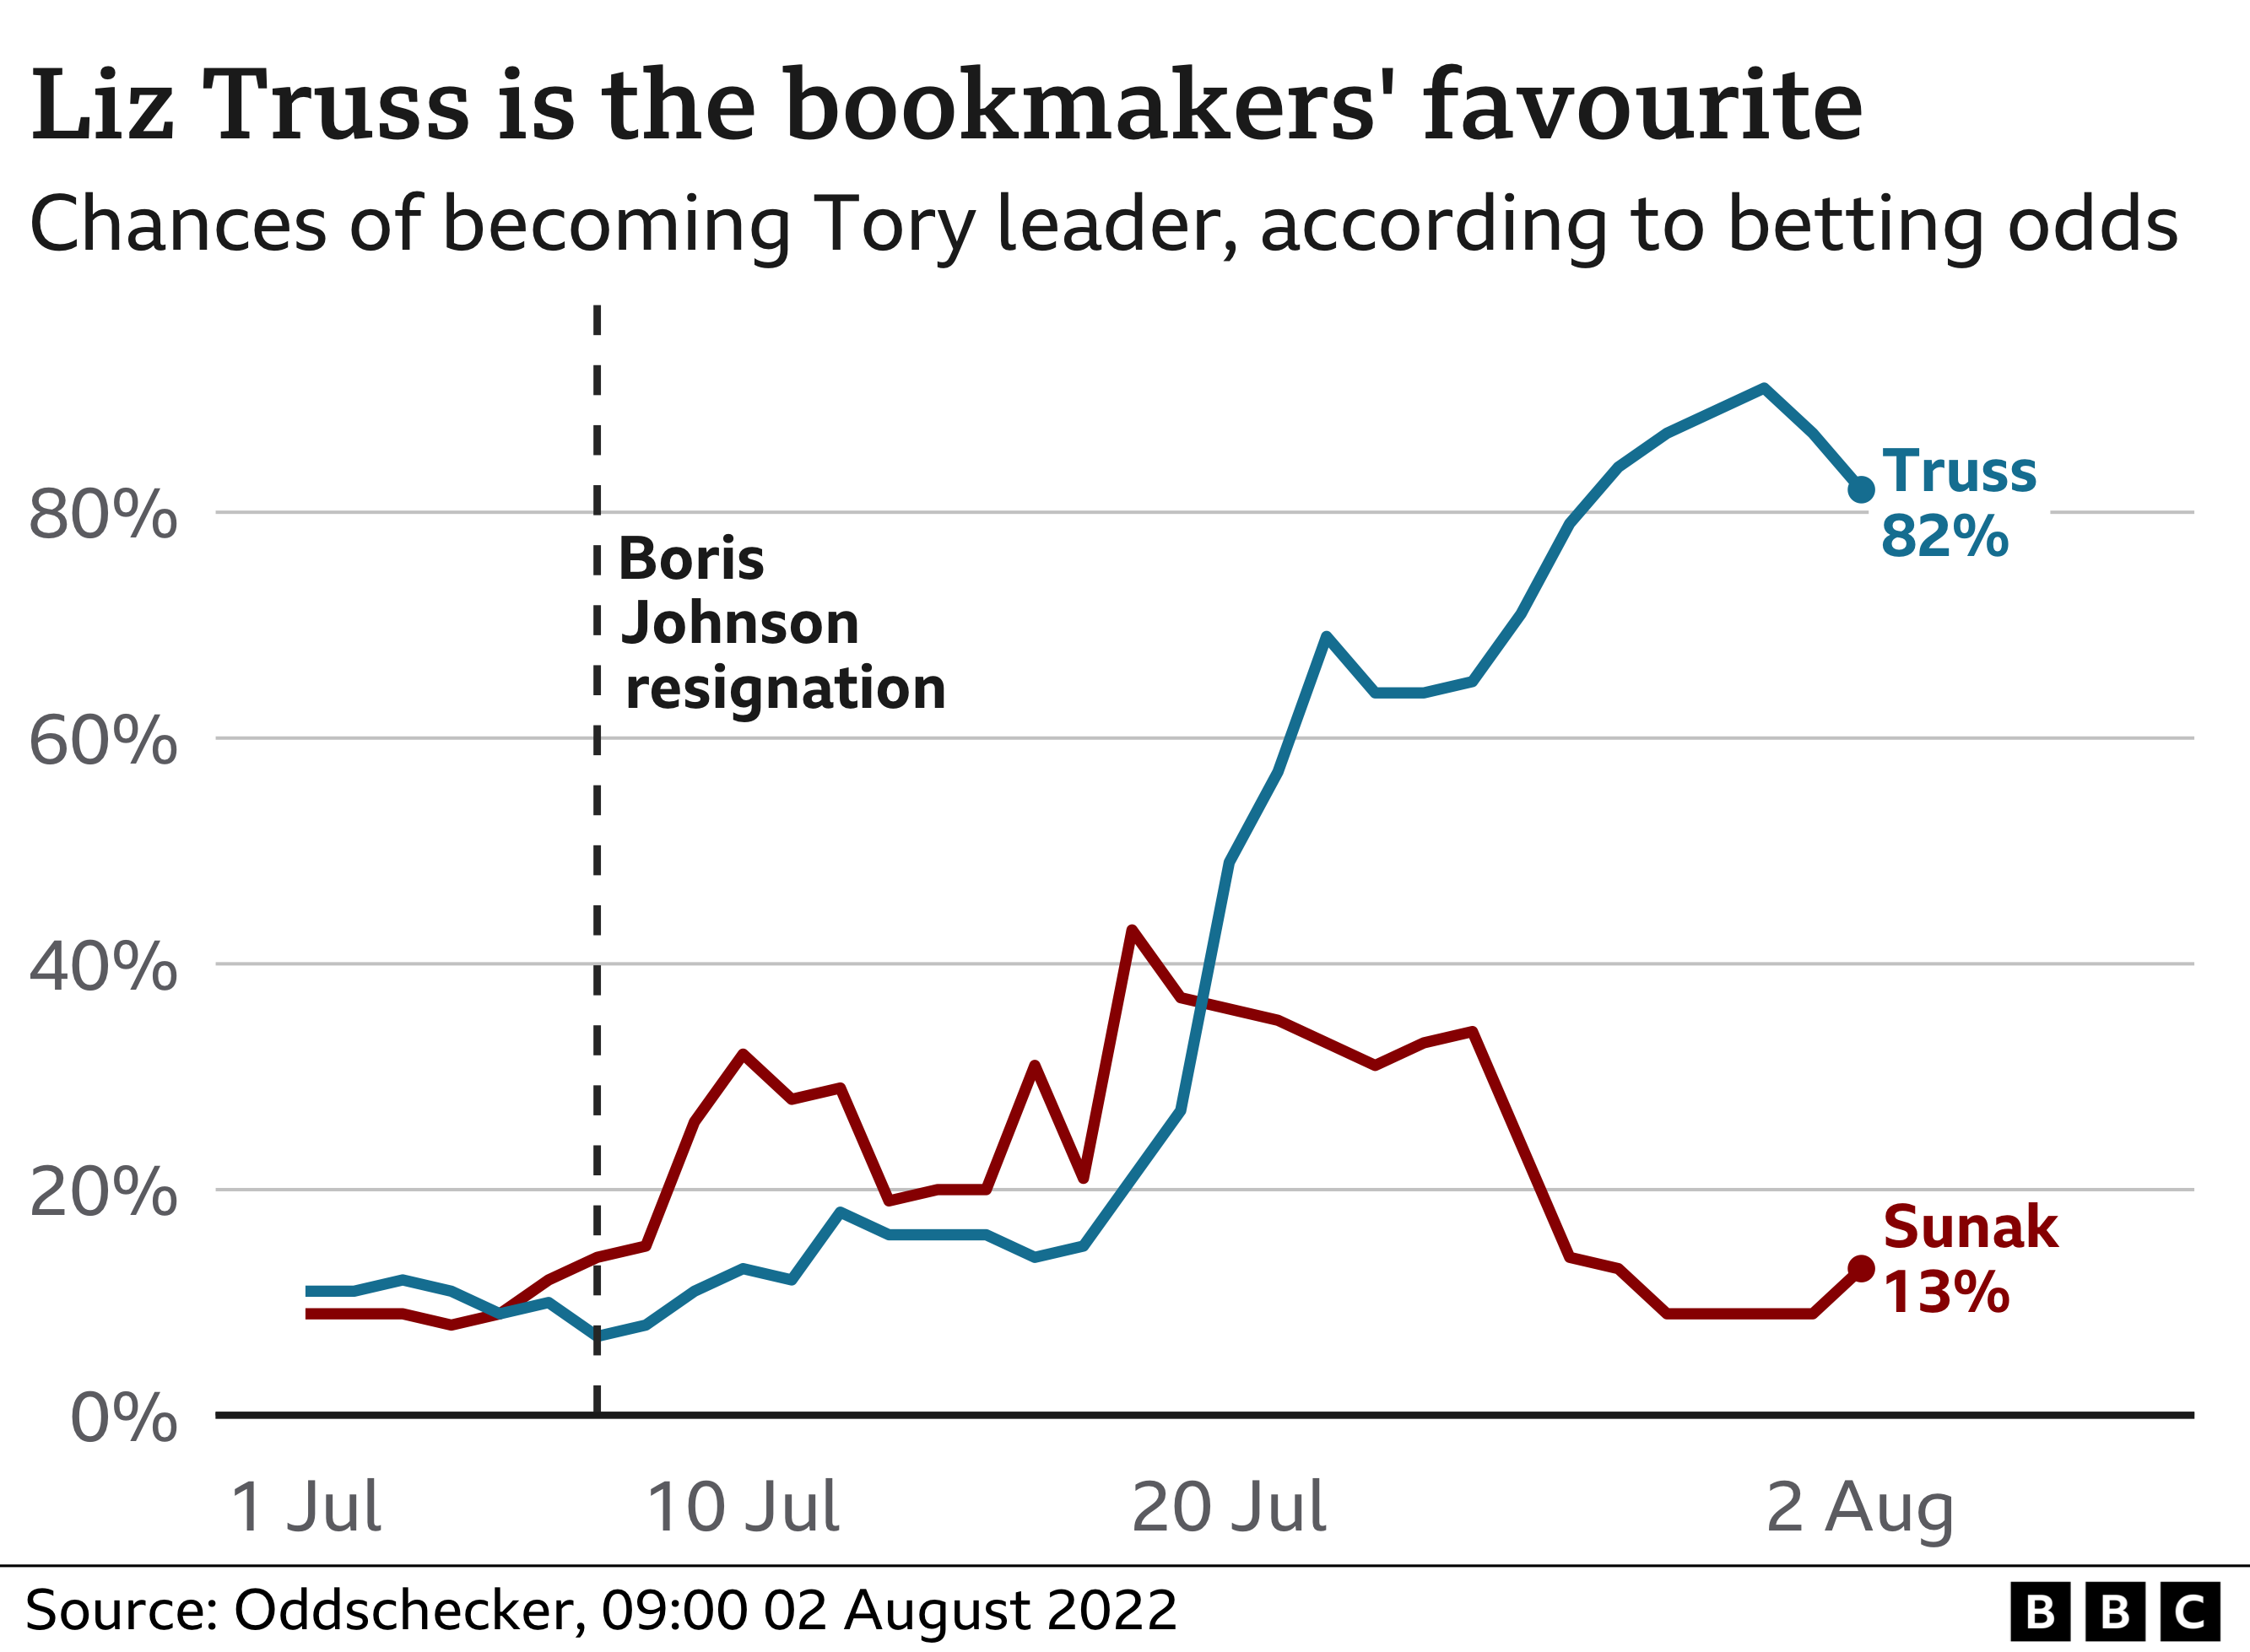 Chart showing betting odds on the candidates